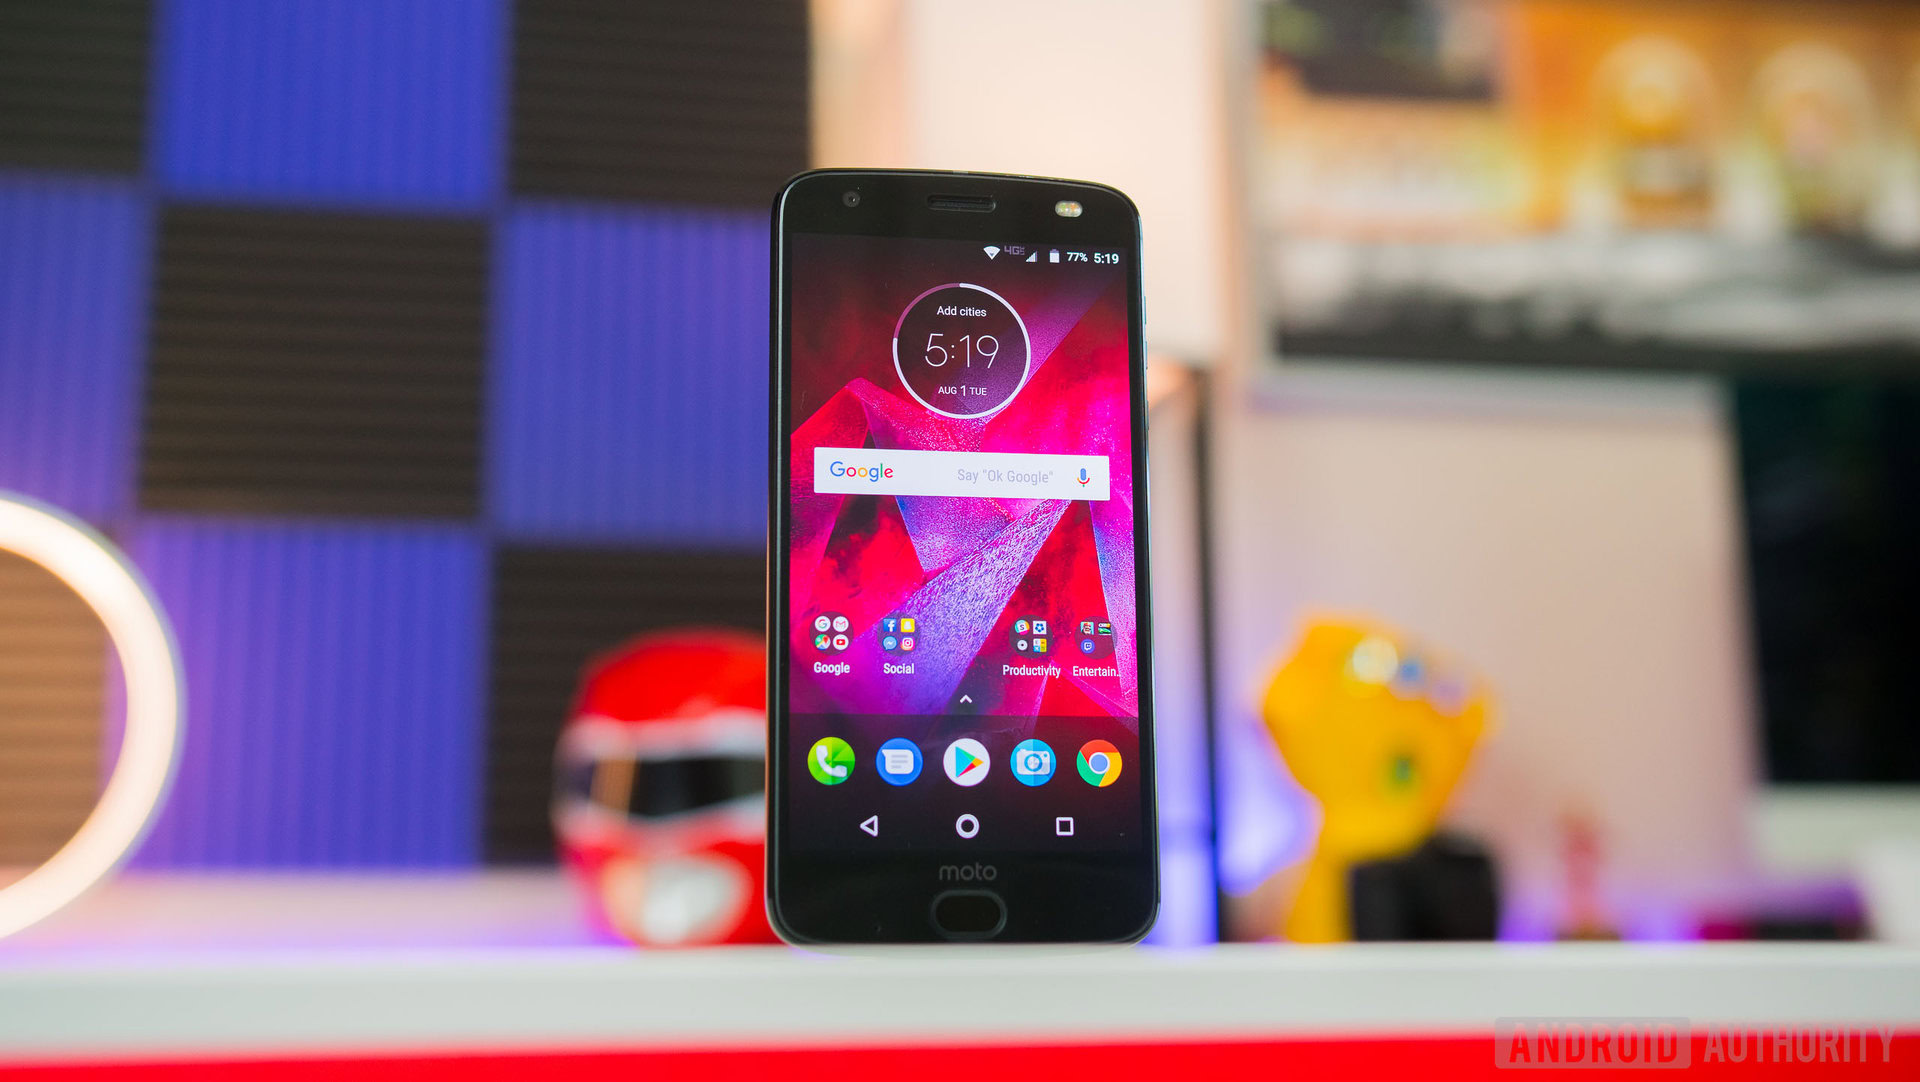 If you are a tech geek - Motorola plans to bring an Android 8.0 Oreo update  for the Moto G4 Plus. According to a report from XDA Developers, the  Lenovo-owned company appears